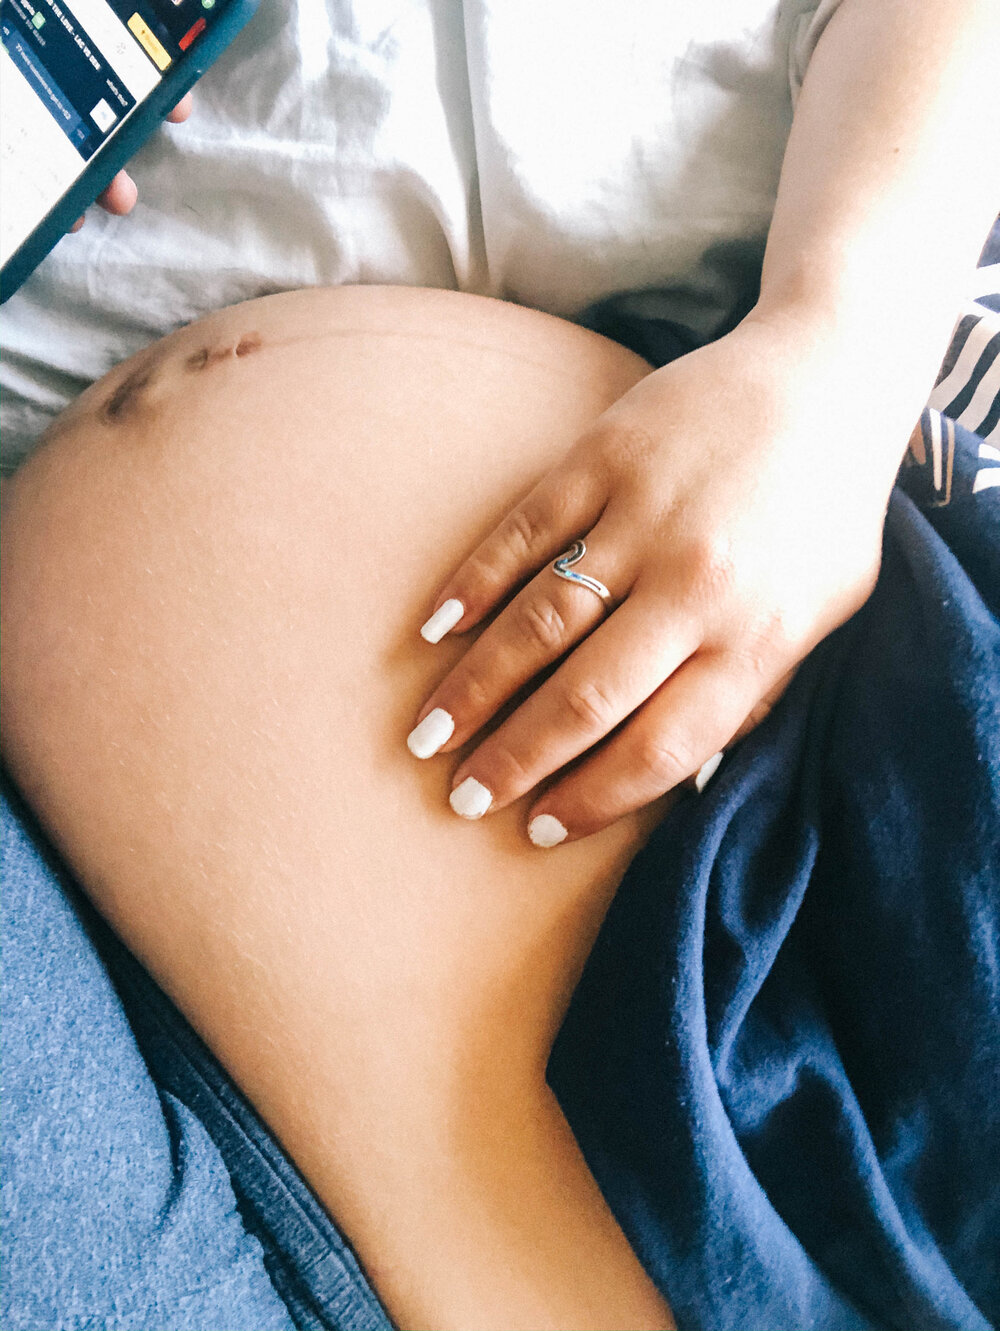 Pregnant In A Pandemic | SaltWaterVibes